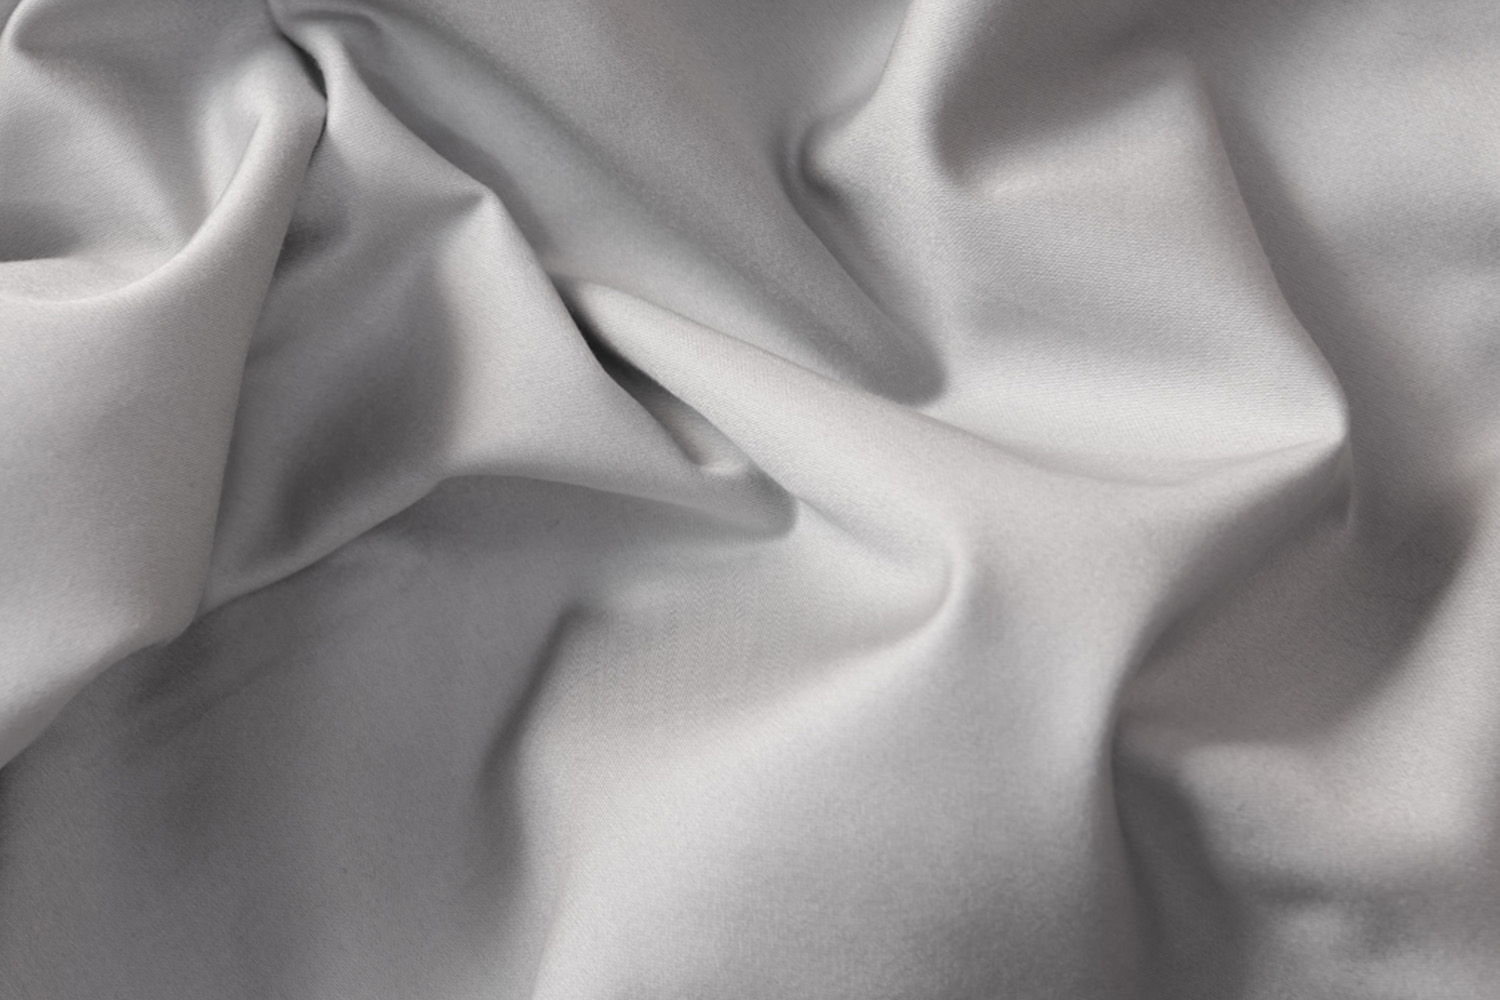 Close-up detail of the Egyptian Cotton Sheets